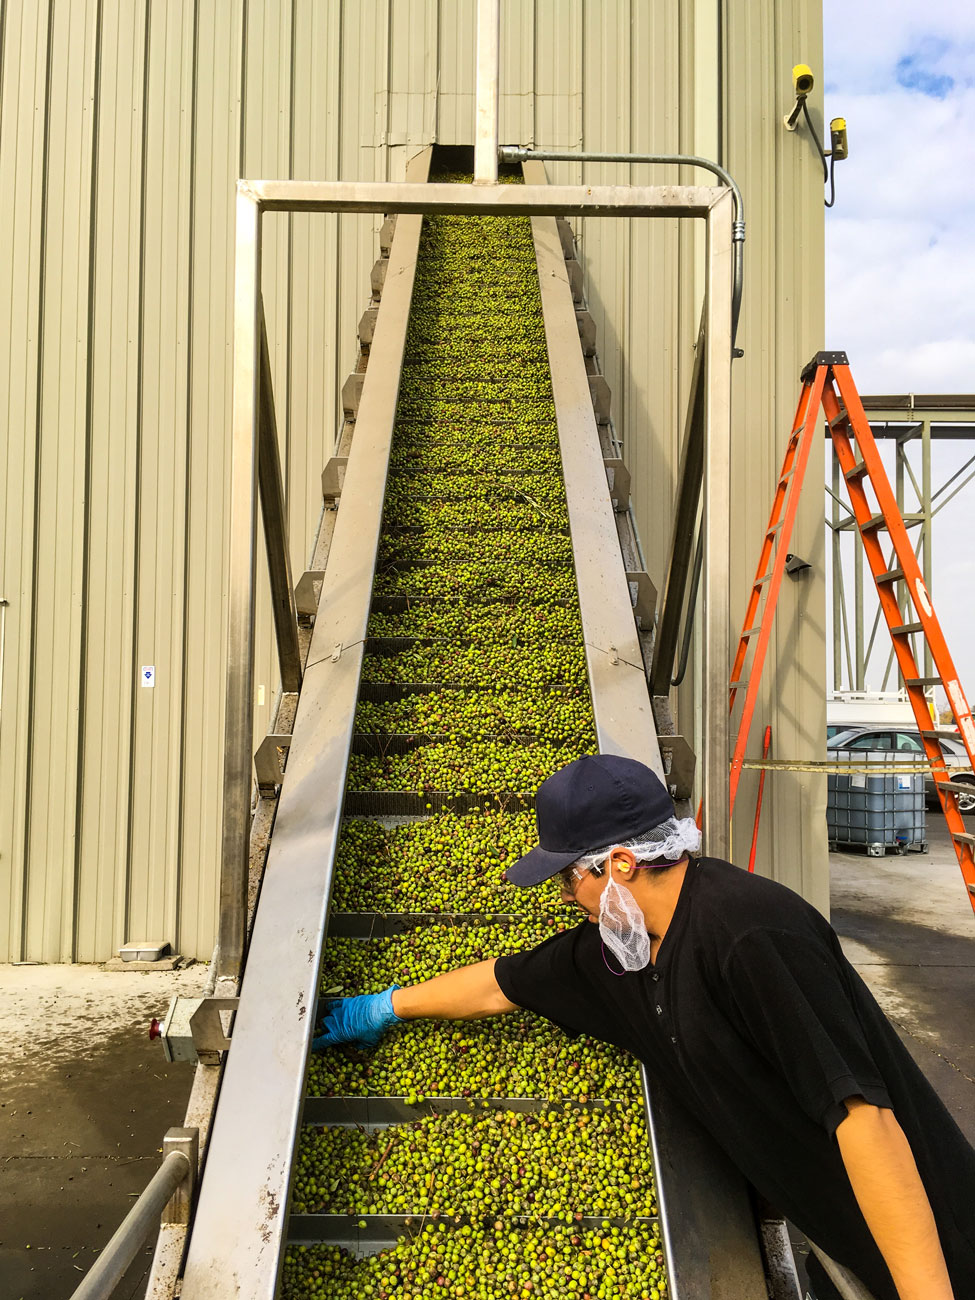 Olives being sorted through.